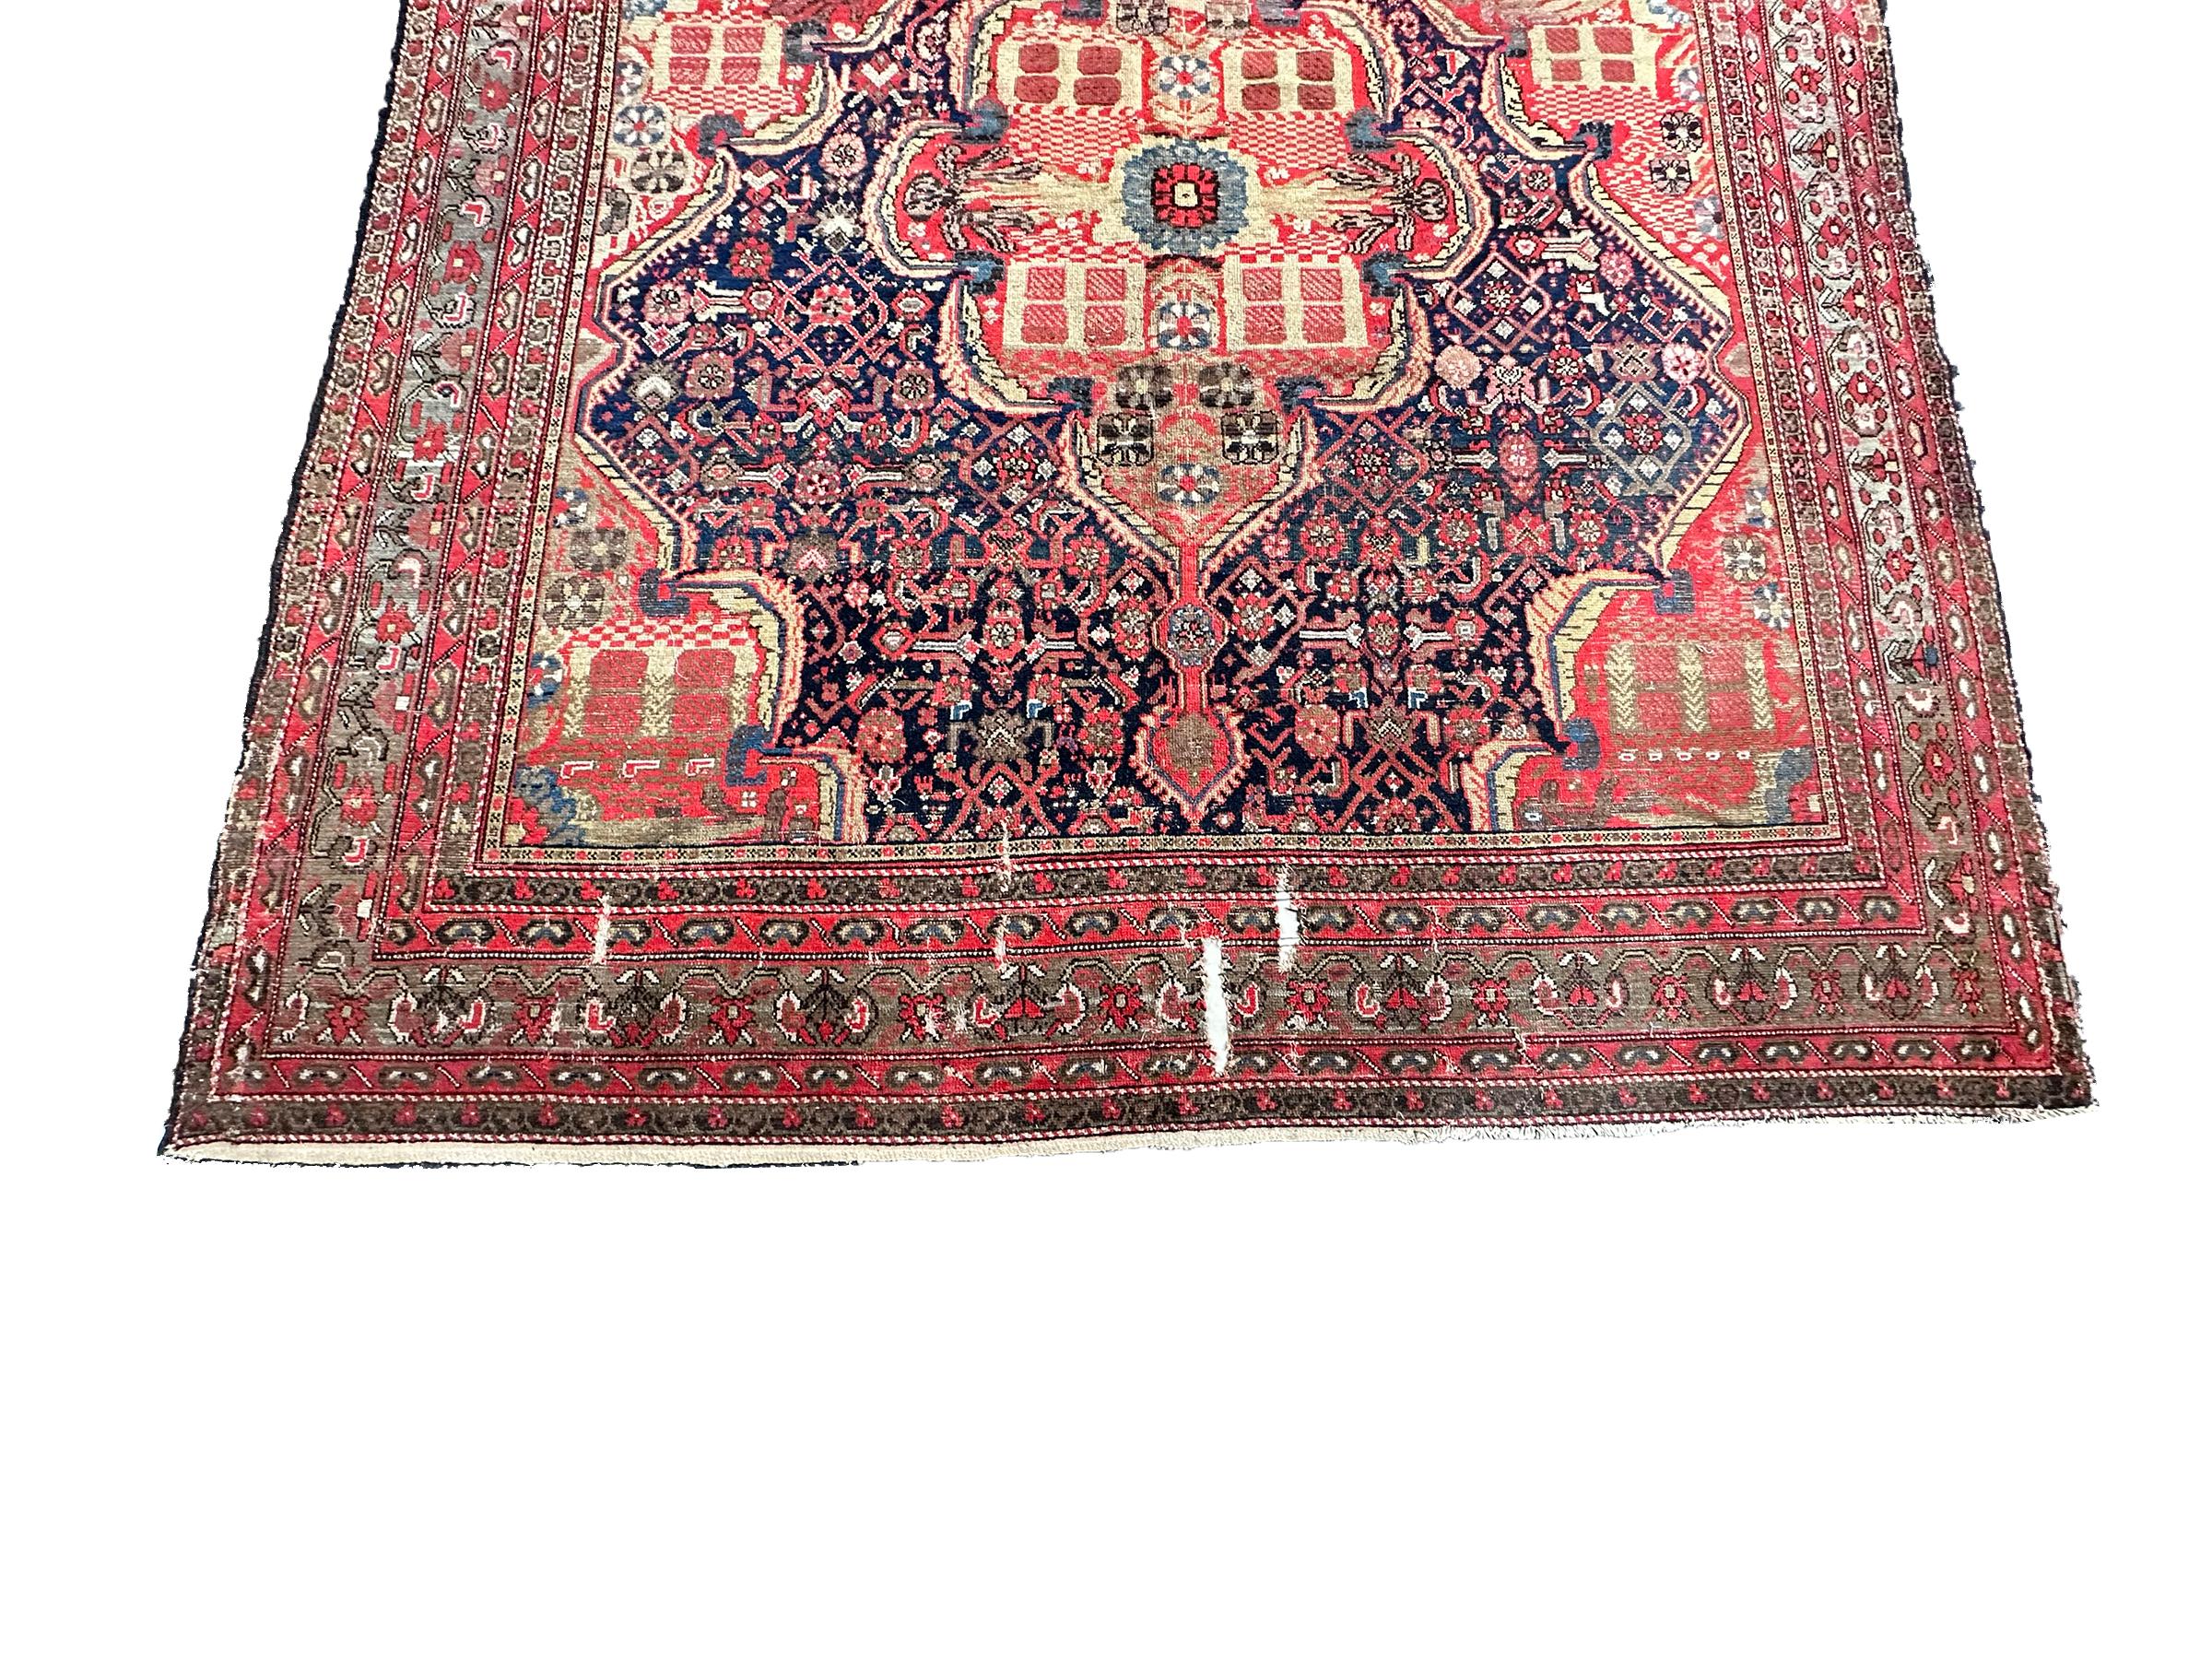 Hand-Knotted Antique Persian Mahal Sultanabad Rug 1880 Geometric 9x17 Handmade 257cm x 511cm For Sale